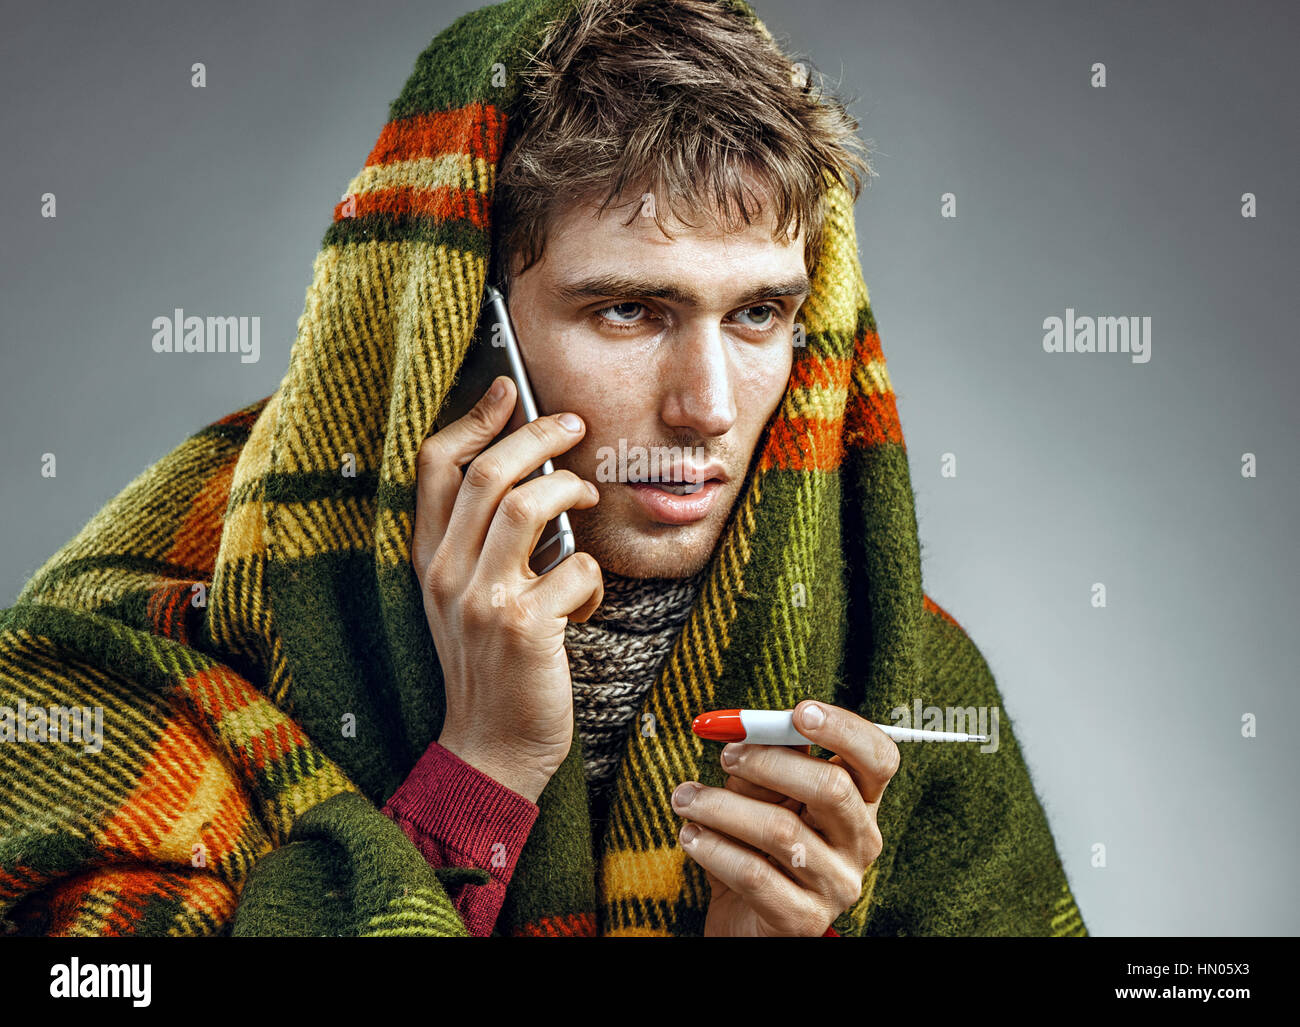 Sick man wrapped in blanket with a high temperature calling on the phone. Man suffering cold and winter flu virus. Health care concept Stock Photo